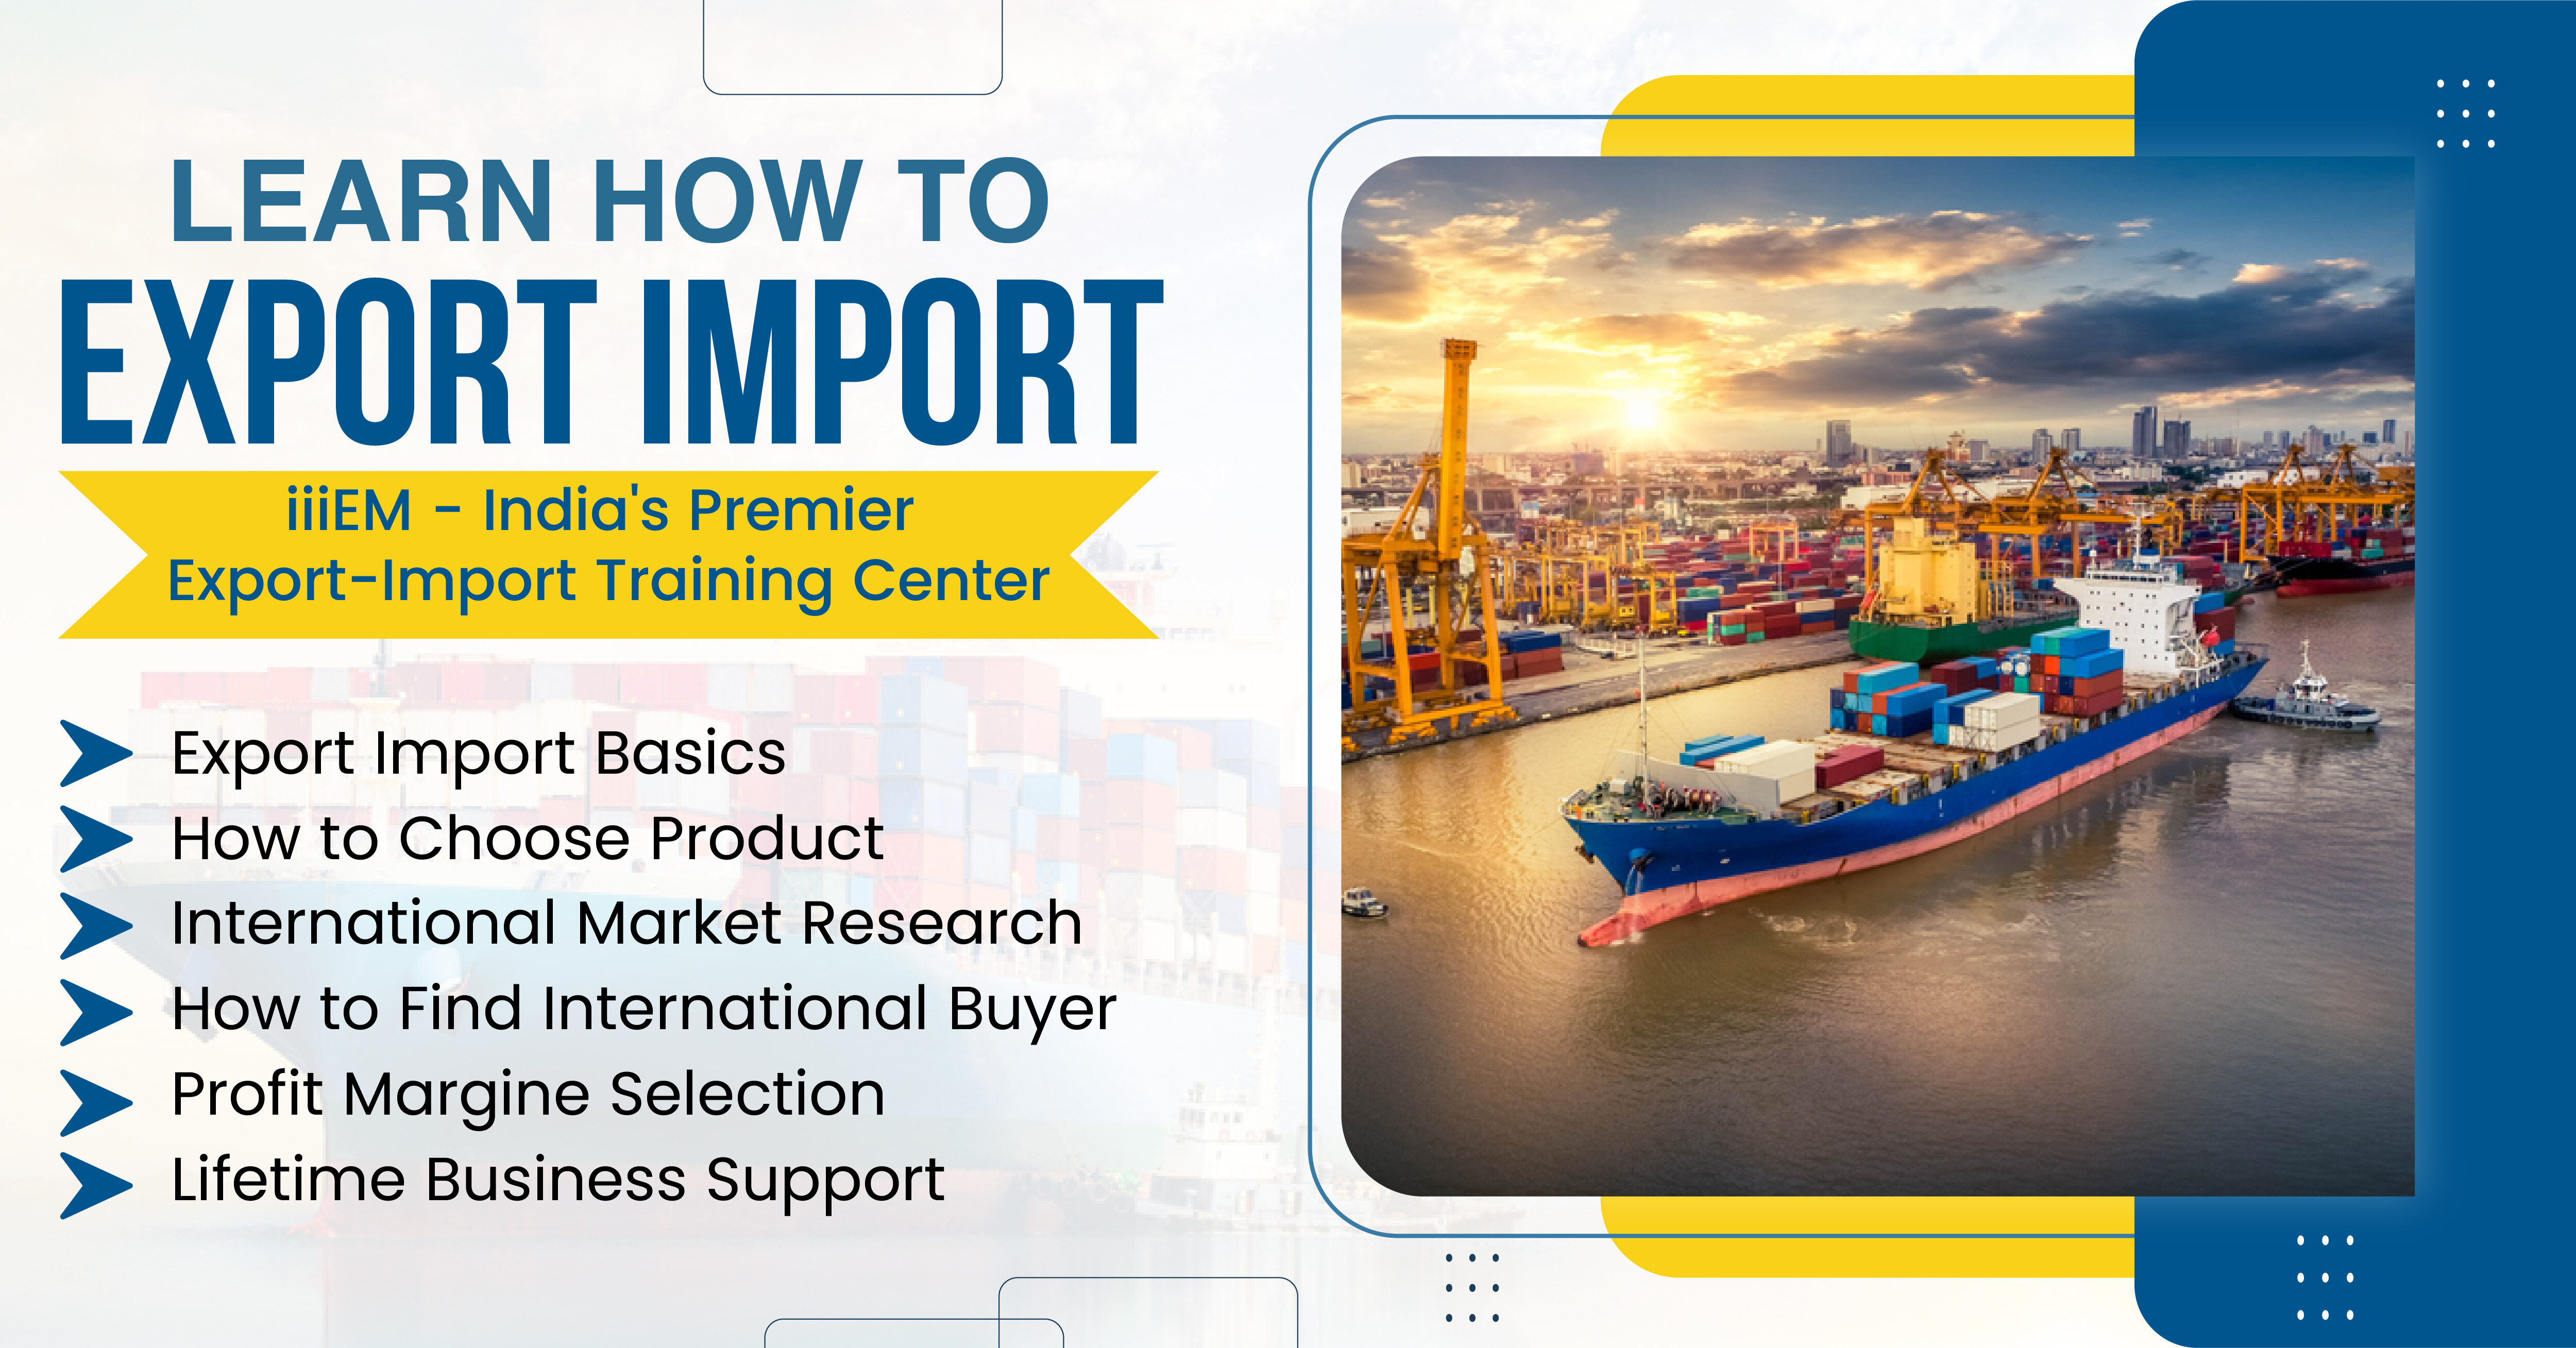 Start and Setup Your Export Import Business with training in Delhi, New Delhi, Delhi, India